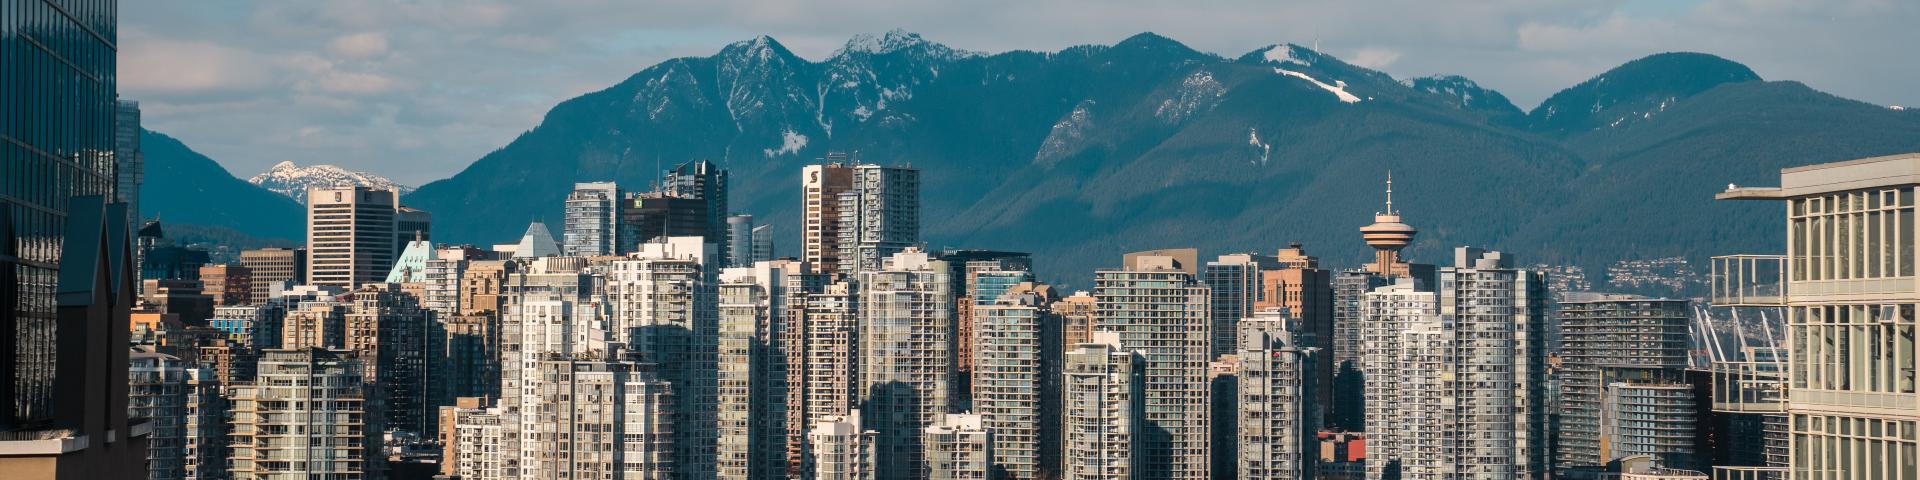 A skyline of Vancouver City, with the mountains in the background